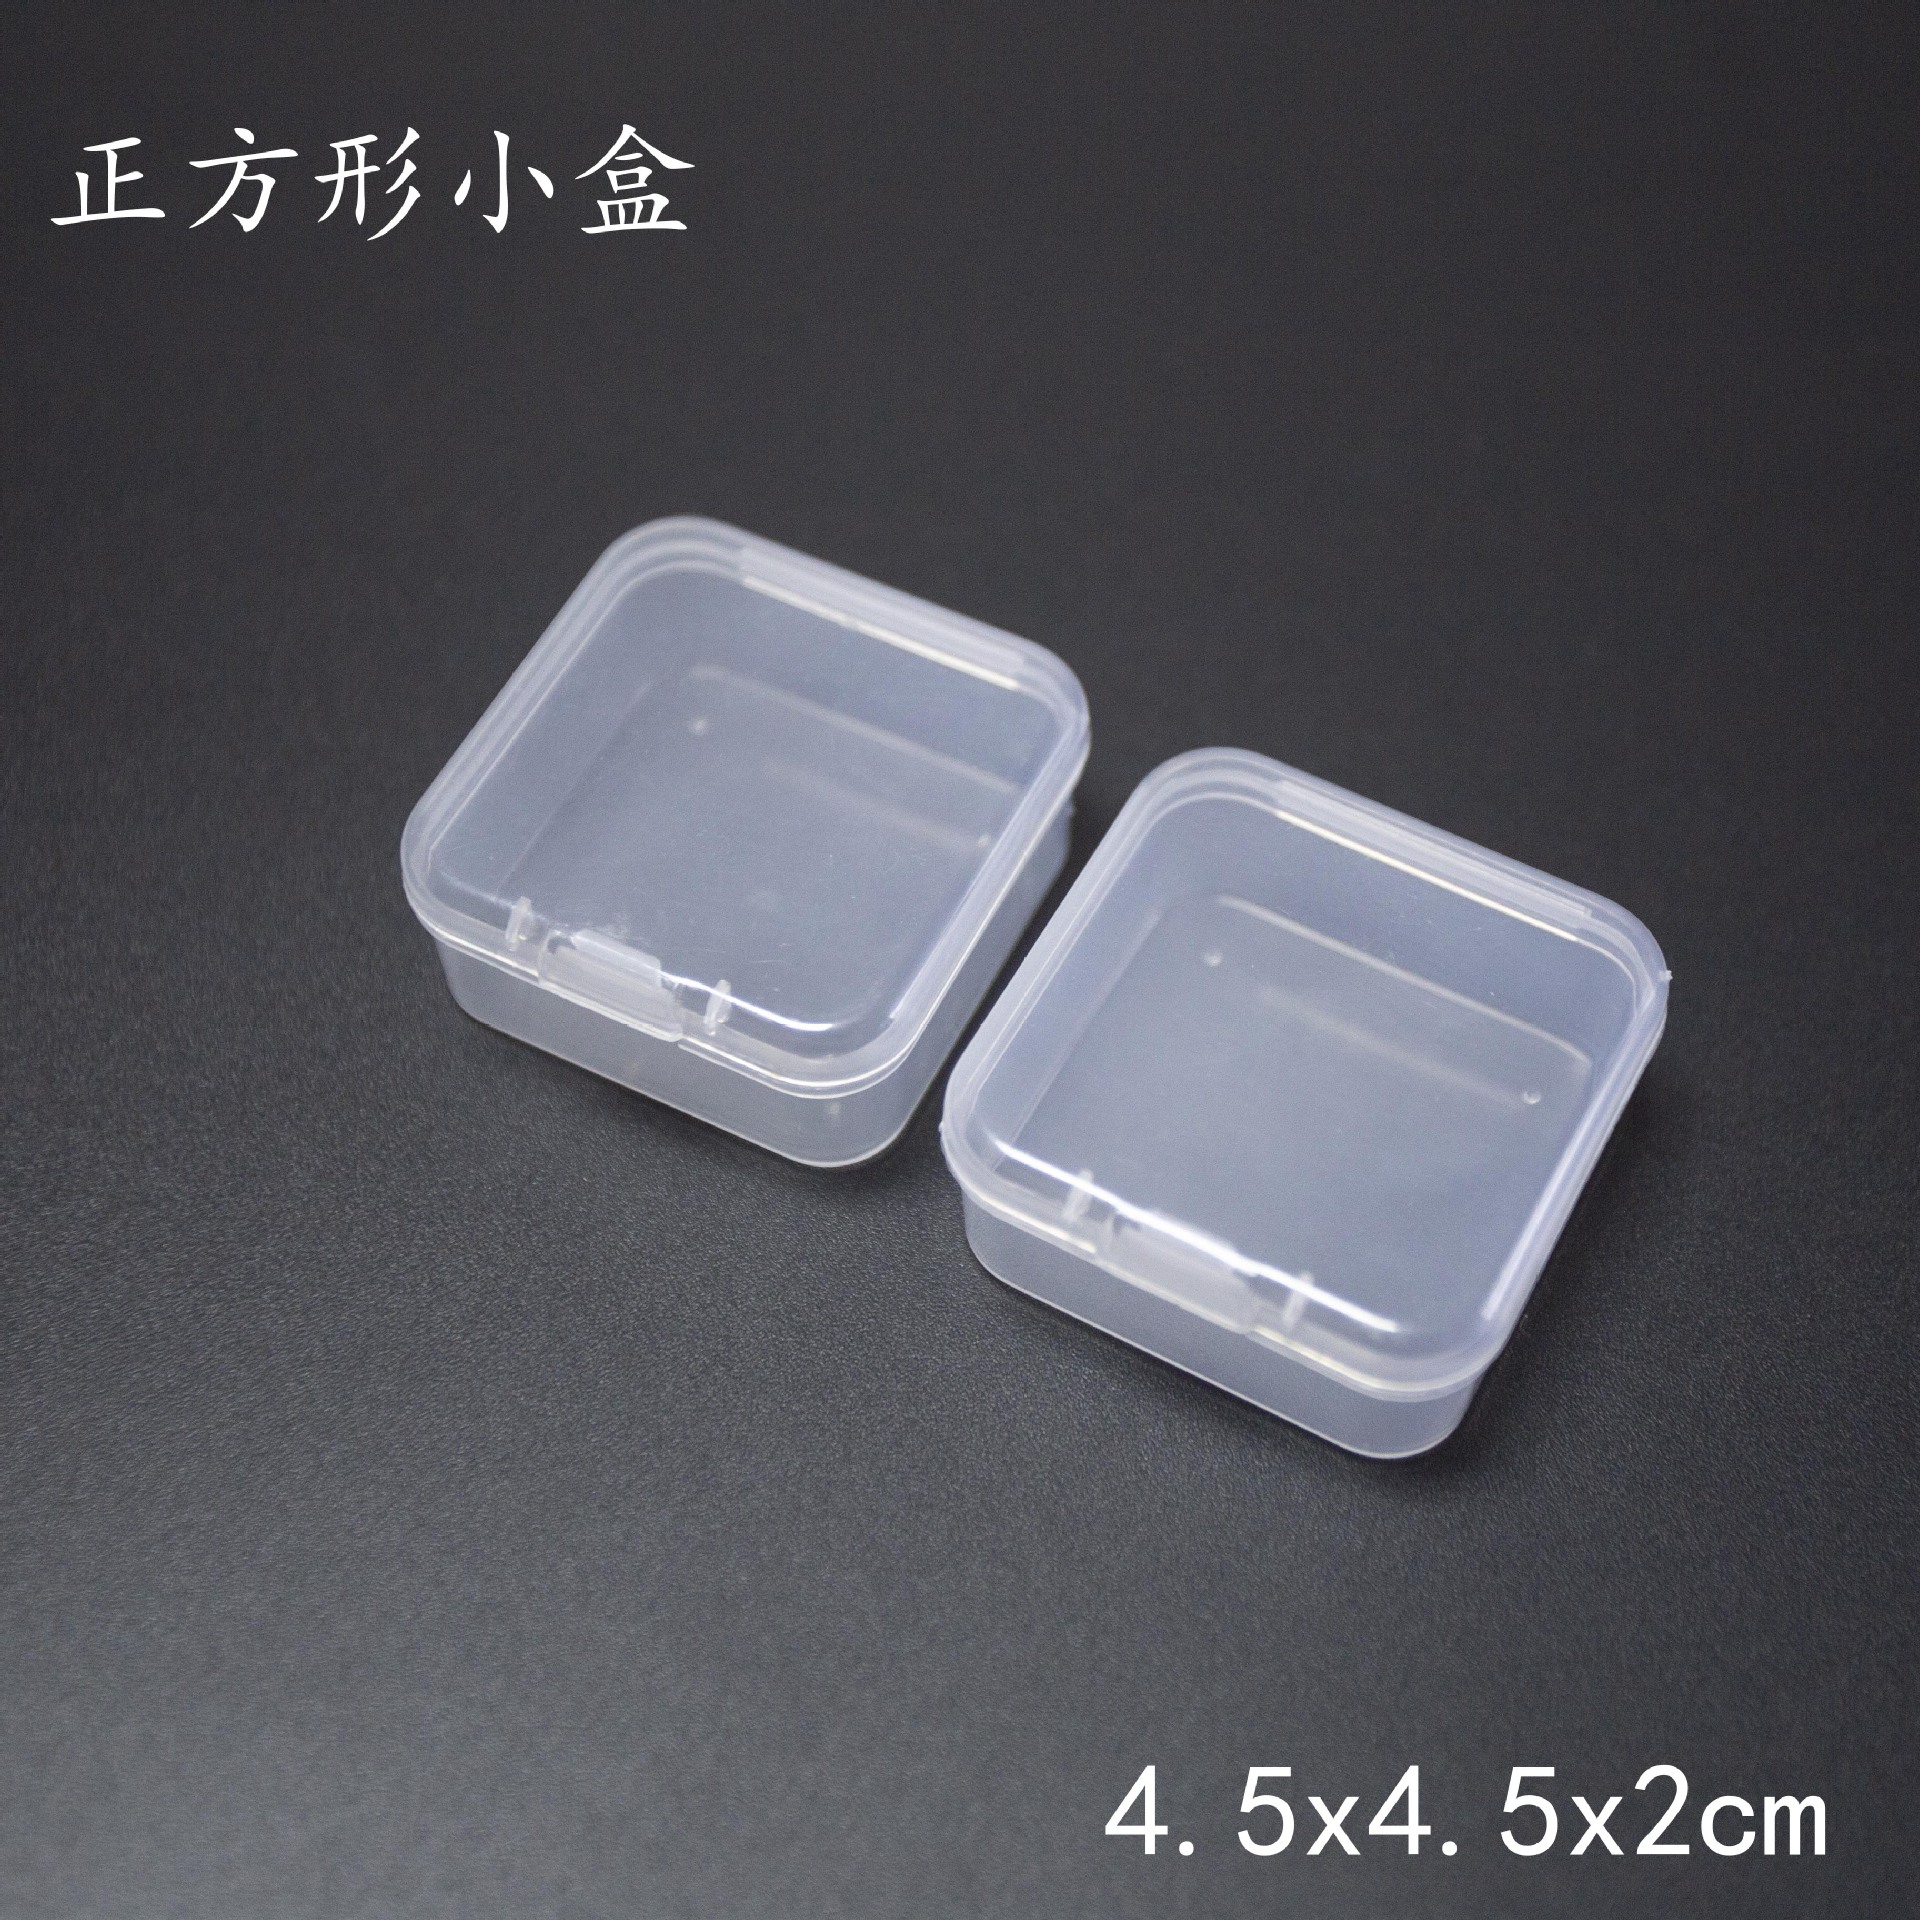 Transparent Rectangular Plastic Pp Box Digital Mask Components Packaging Small Box Accessories Finishing Storage Box